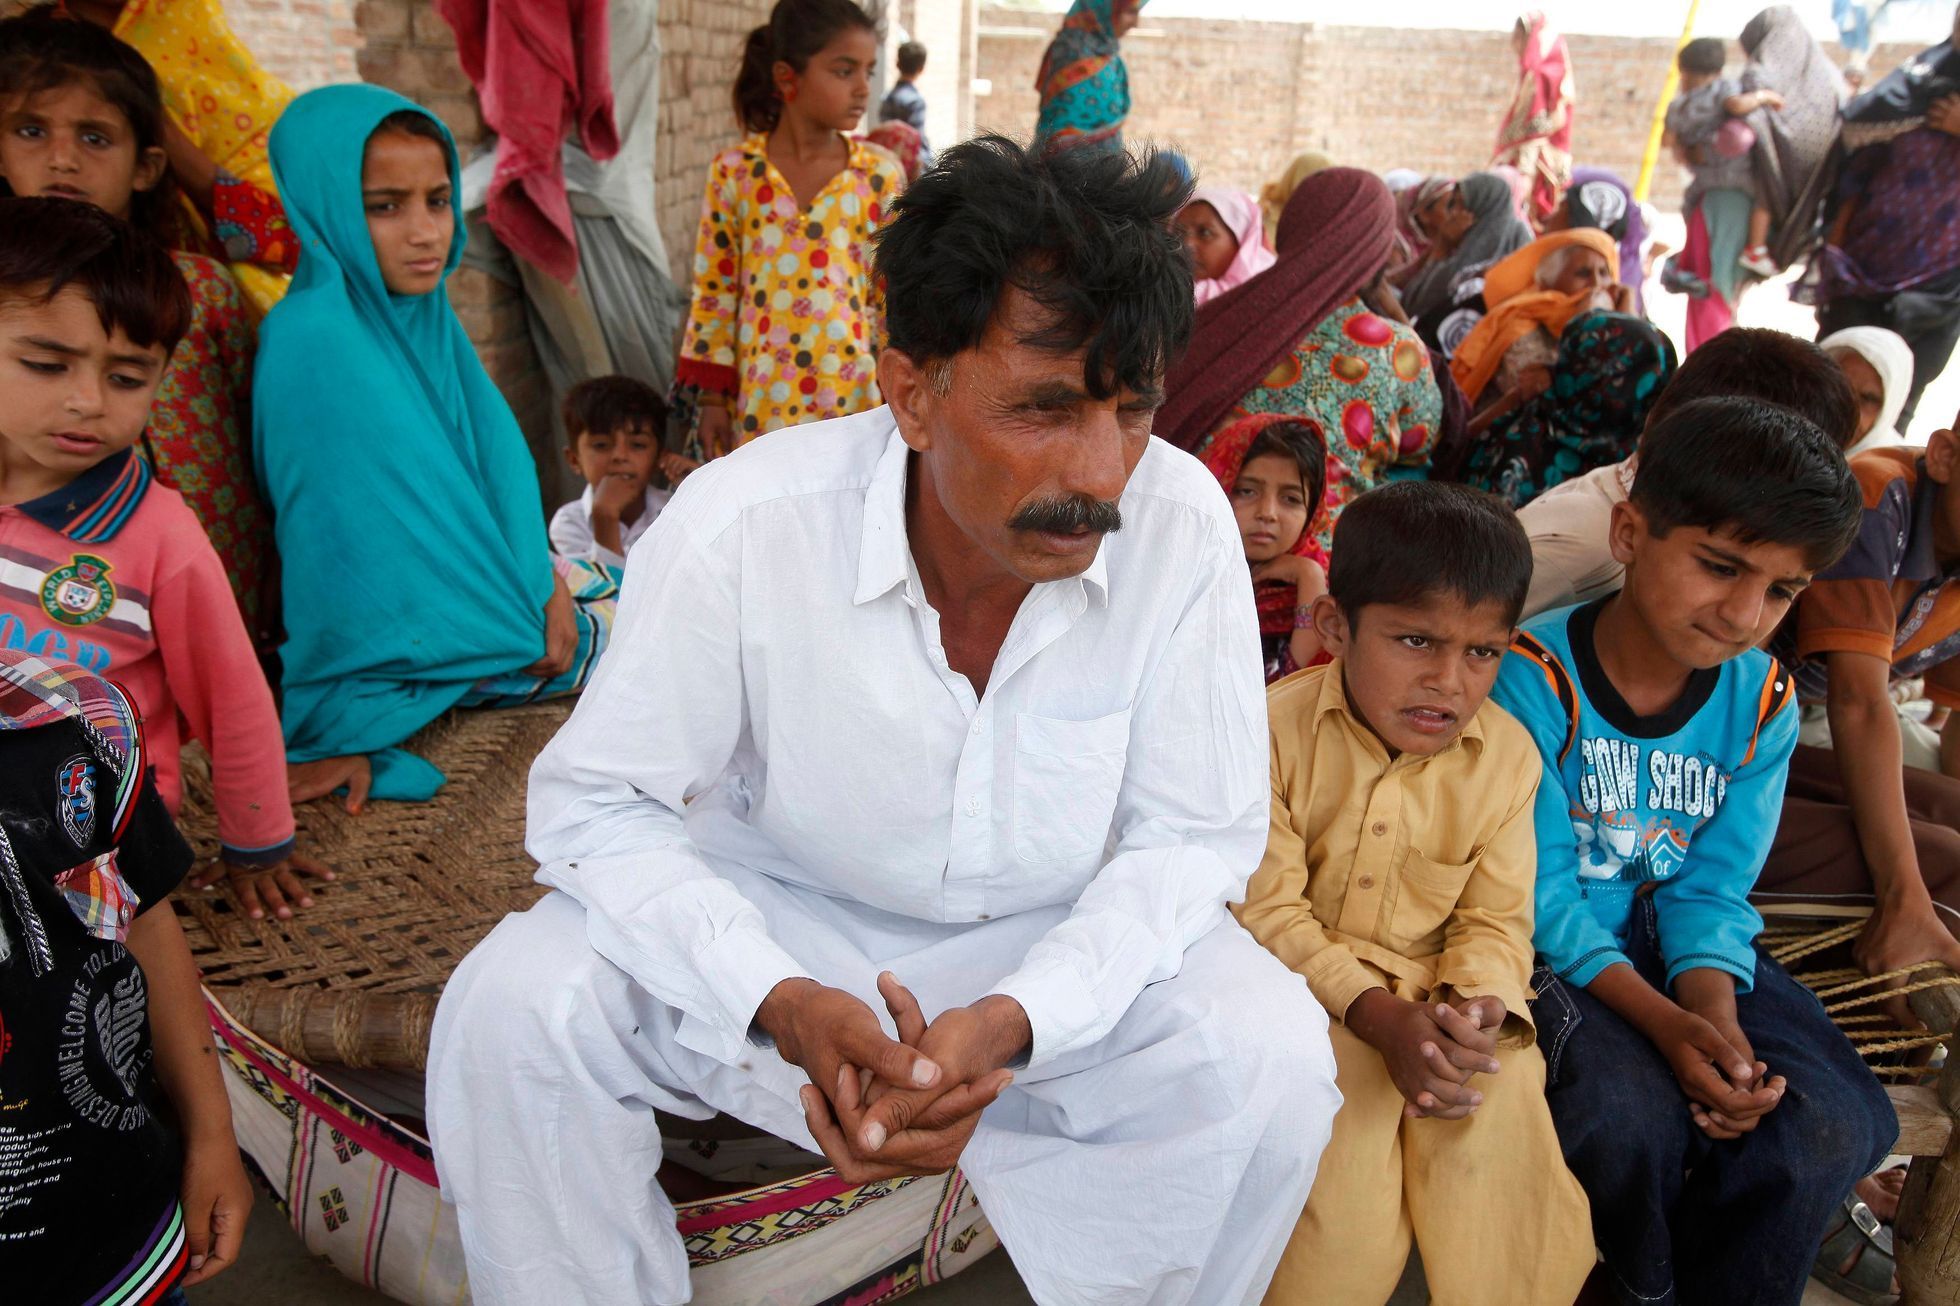 Iqbal sits with his family members at his residence in a village in Moza Sial